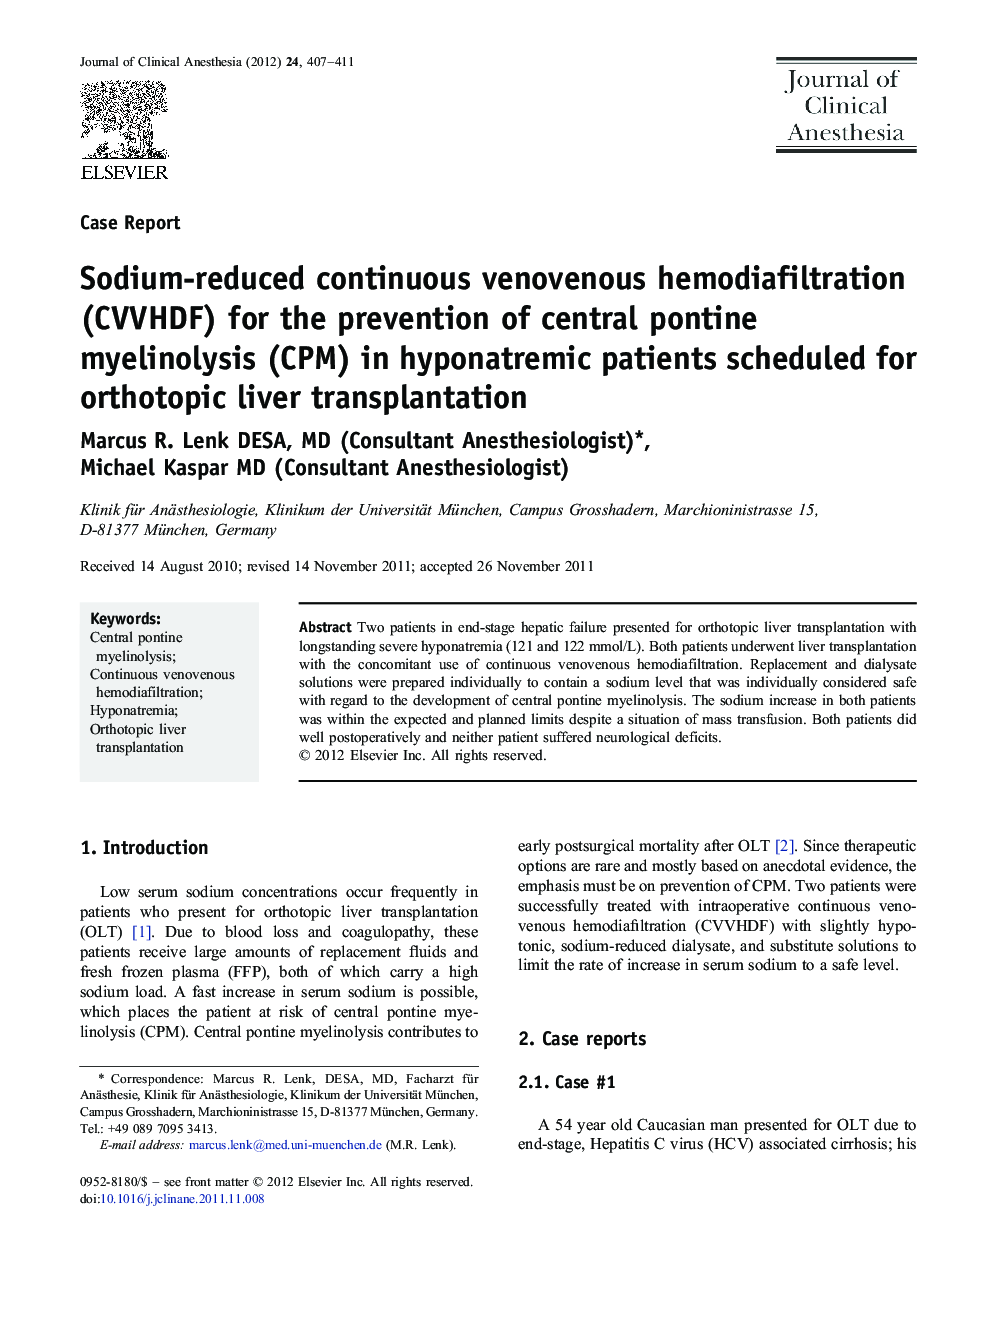 Sodium-reduced continuous venovenous hemodiafiltration (CVVHDF) for the prevention of central pontine myelinolysis (CPM) in hyponatremic patients scheduled for orthotopic liver transplantation